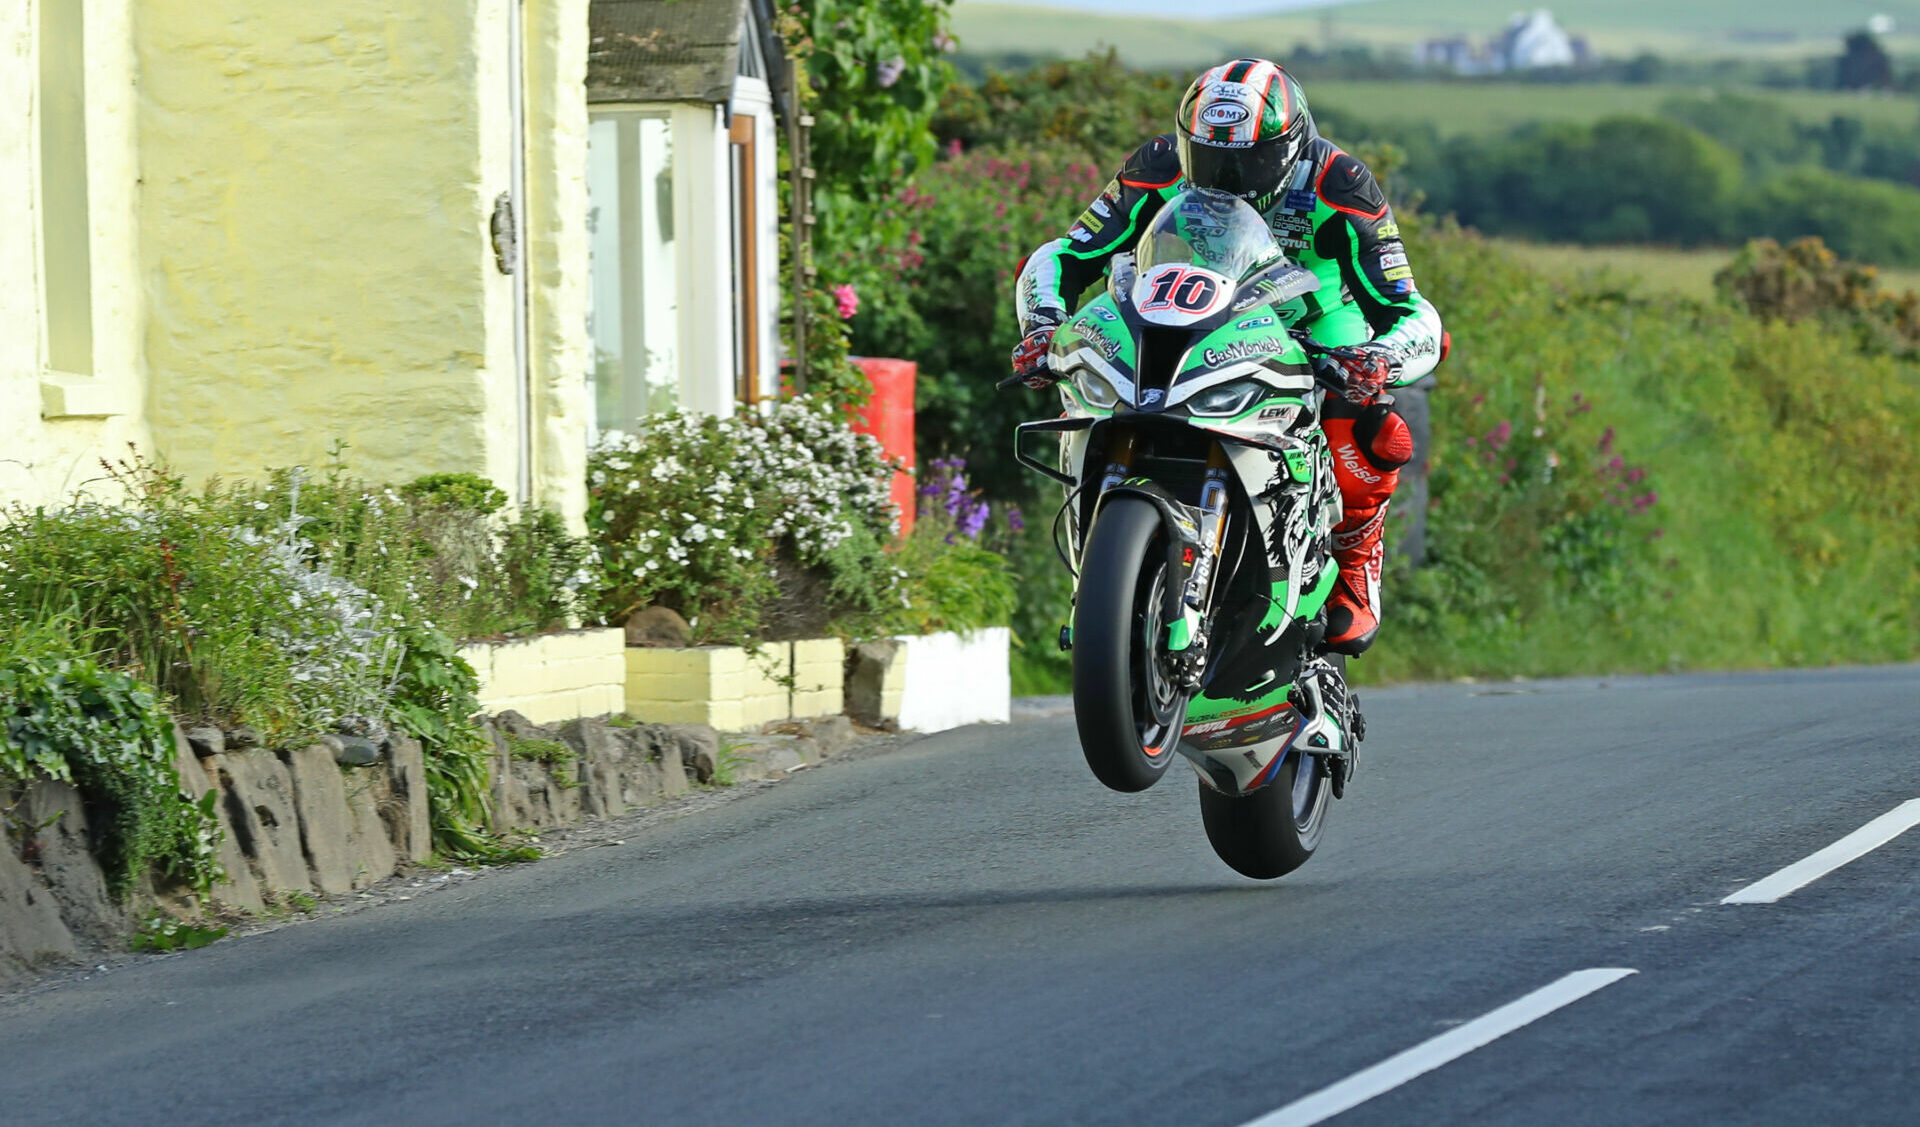 Peter Hickman (10) getting airborne Monday during qualifying at the Isle of Man TT. Photo courtesy Isle of Man TT Press Office.